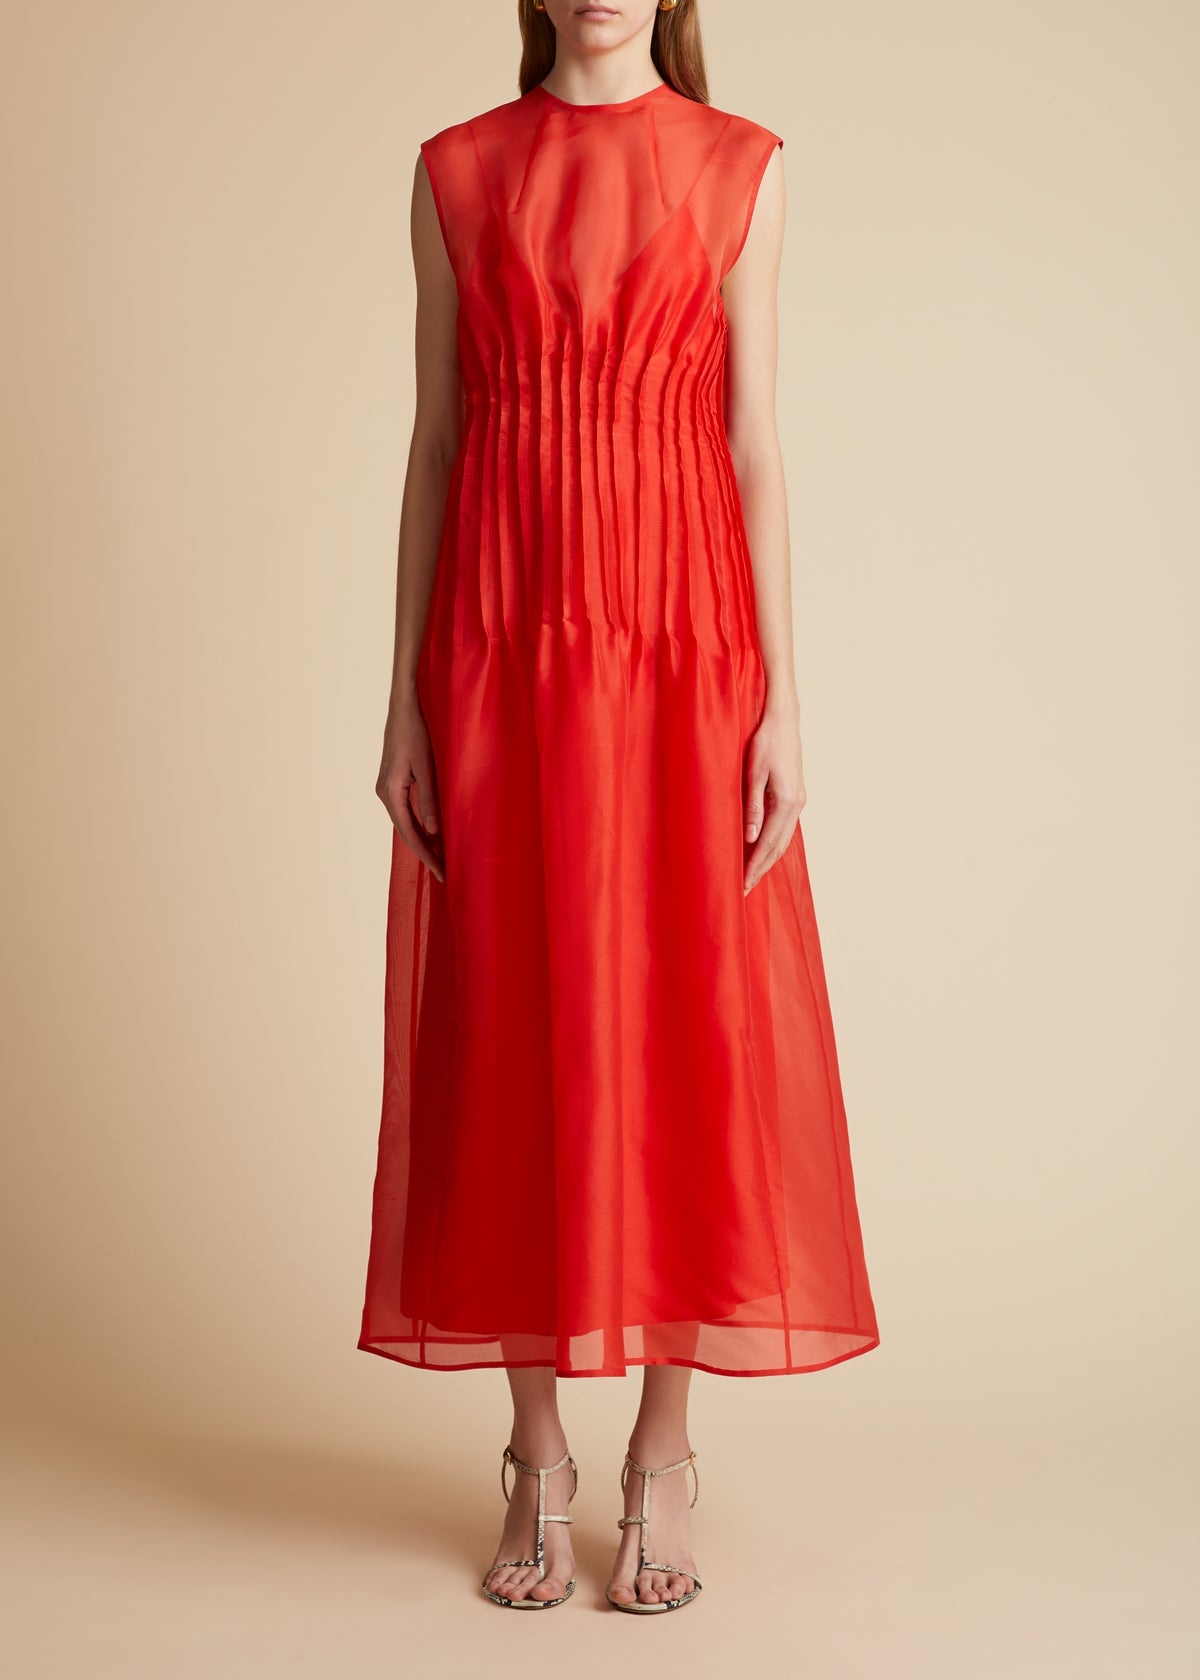 The Wes Dress in Fire Red - 2